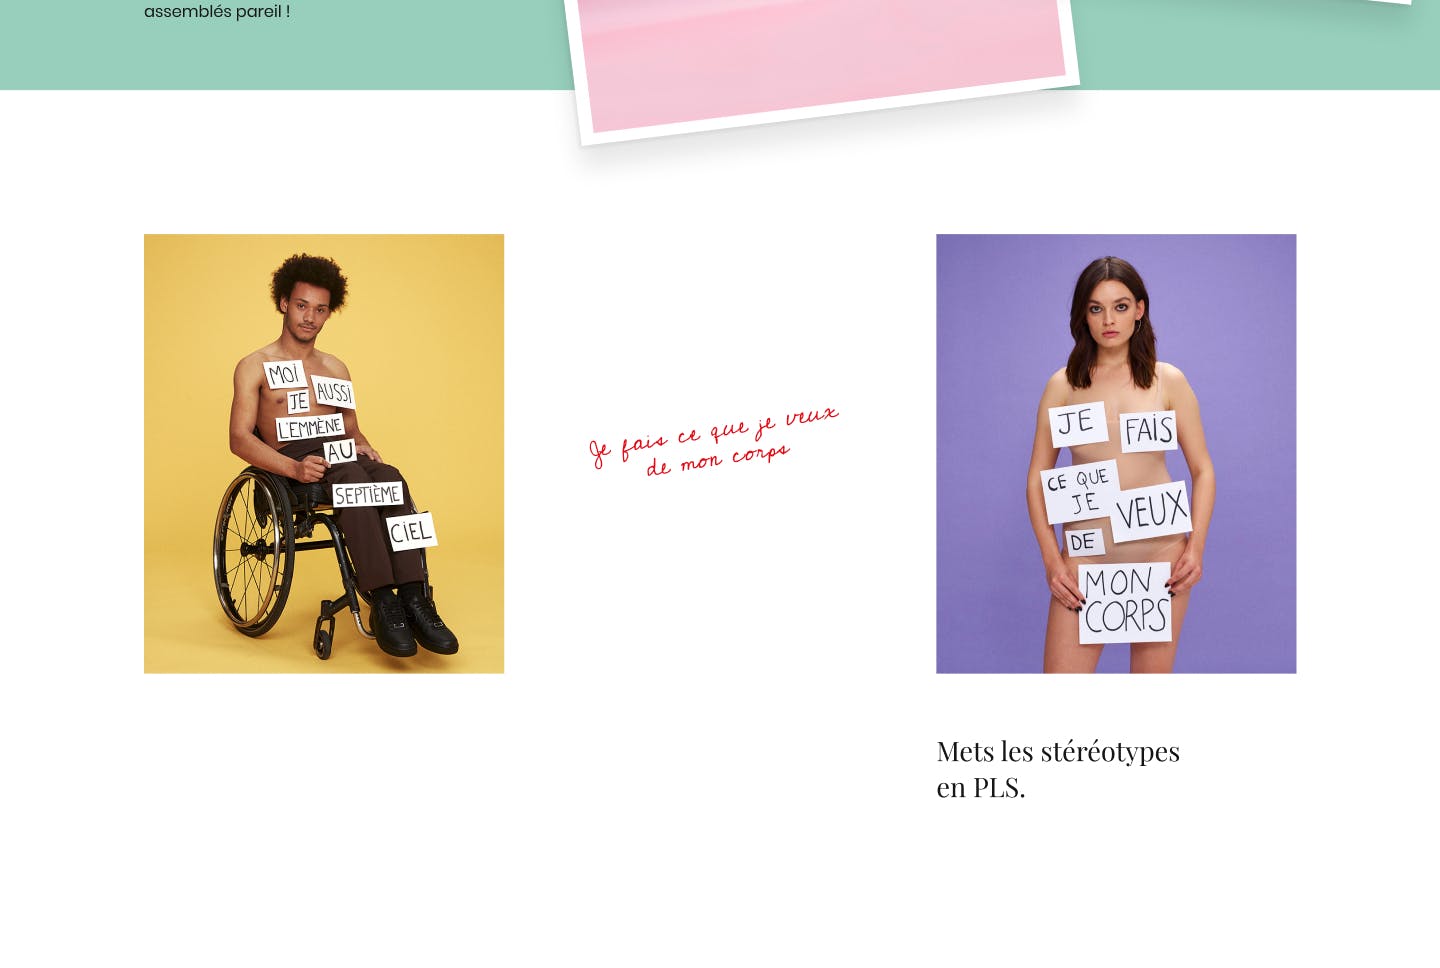 Extract of the website : two pictures of womens with words on them